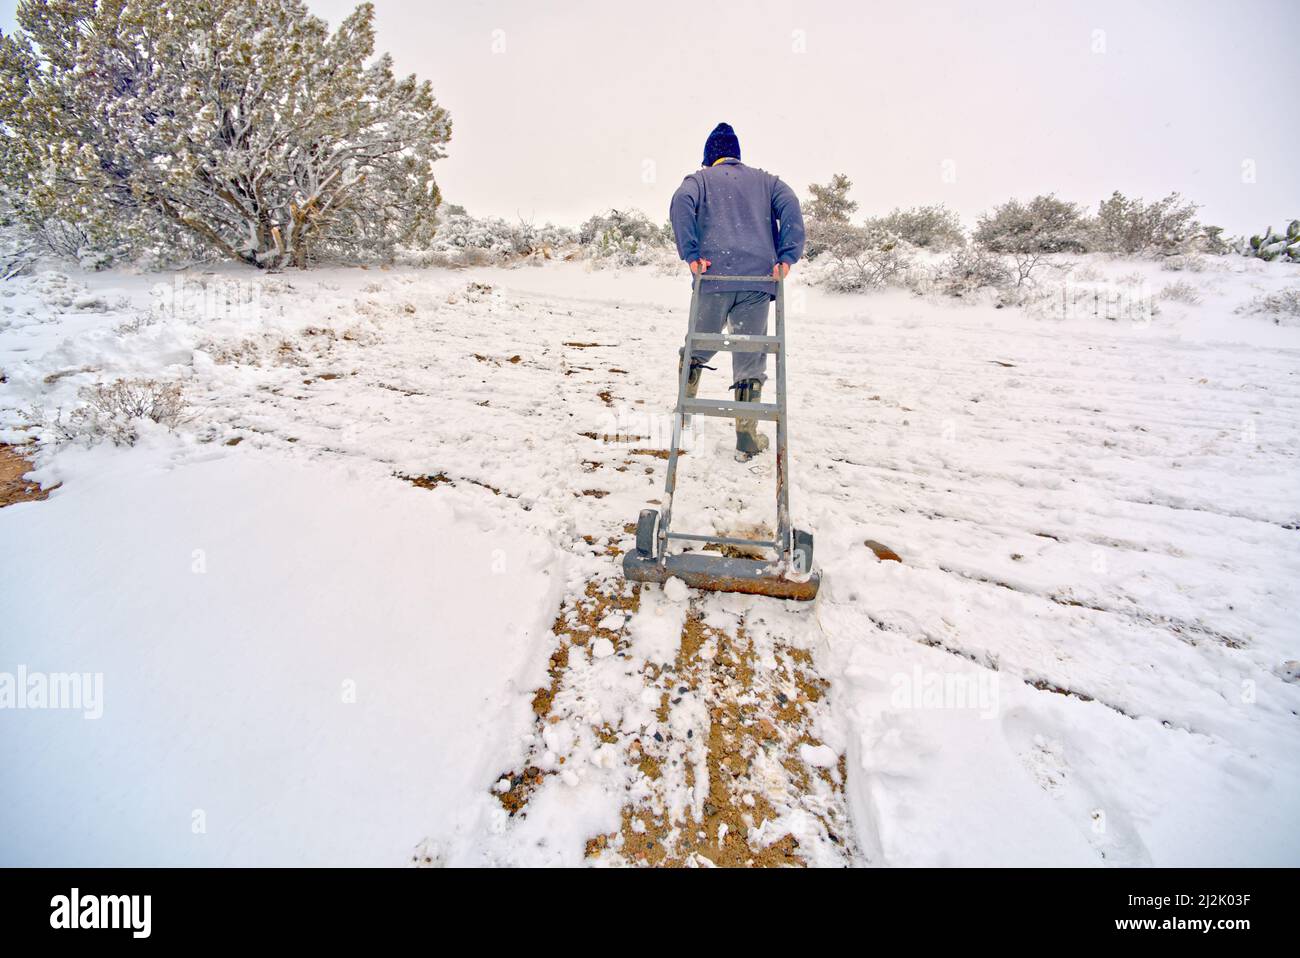 Rear view of a man using an upside down appliance Dolly to clear snow, Chino Valley, Arizona, USA Stock Photo